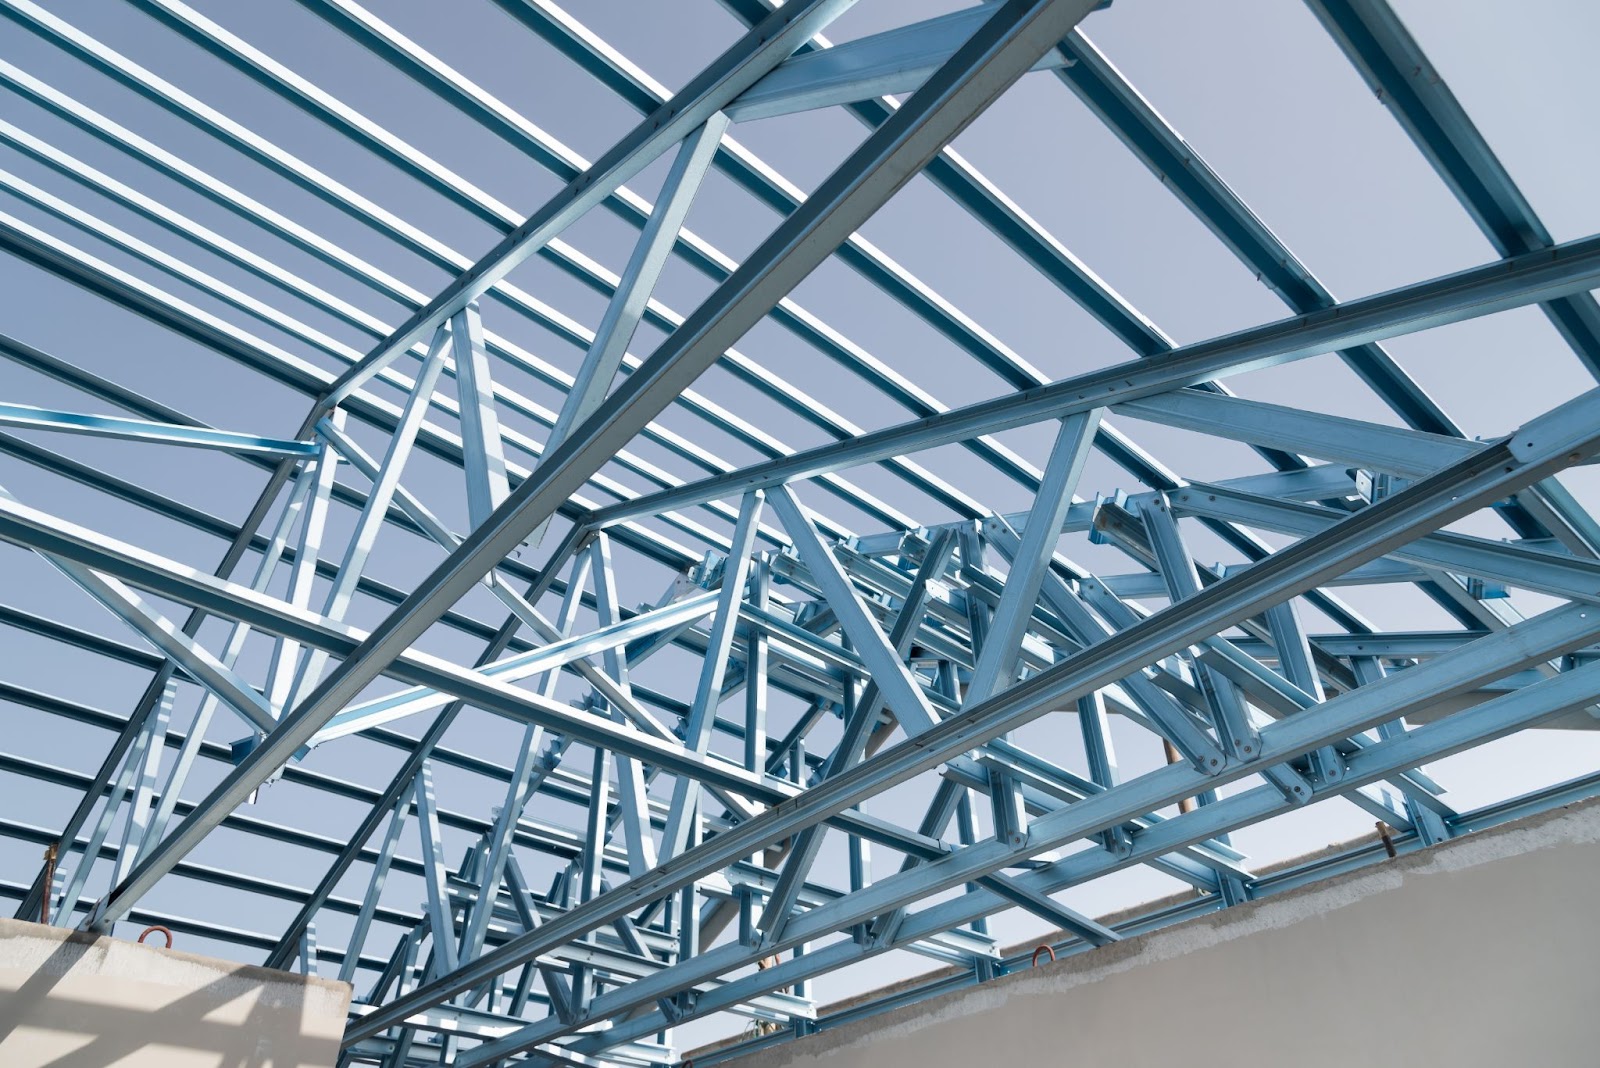 Blue steel trusses supporting a blue roof on a steel structure